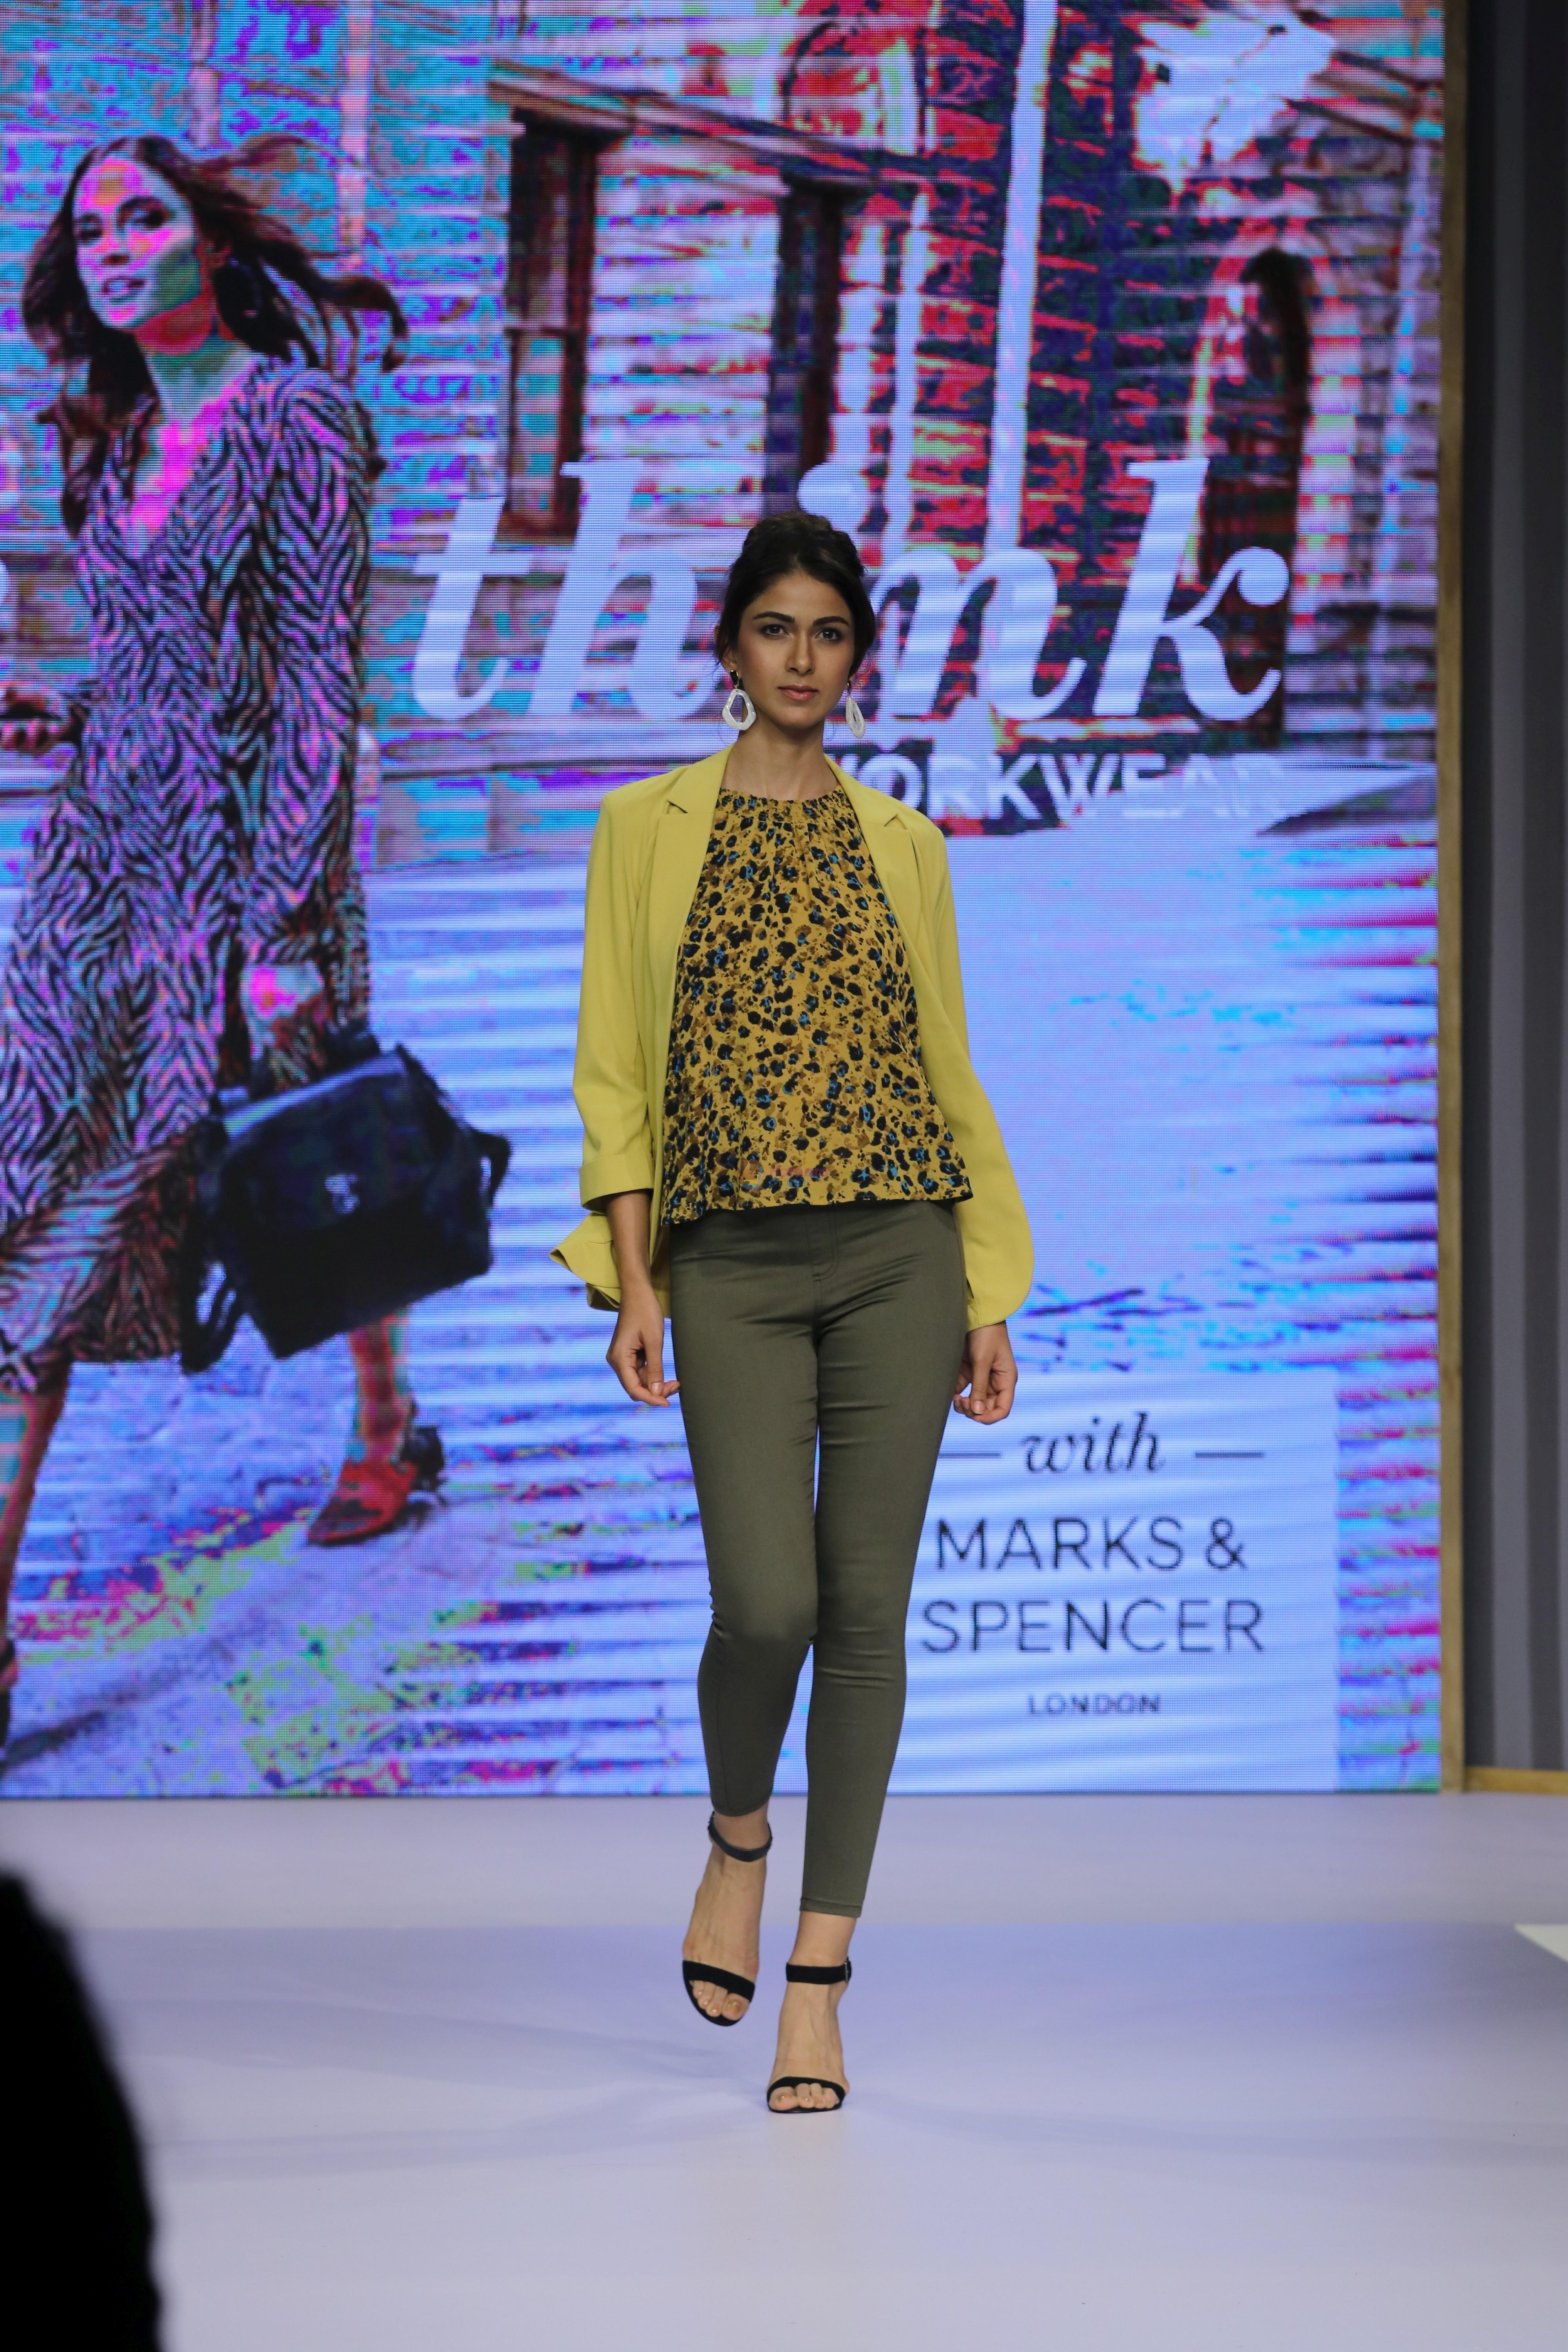 at Preview of Marks & Spencer Spring Summer Collection 2019 at ITC Grand Central on 7th Feb 2019